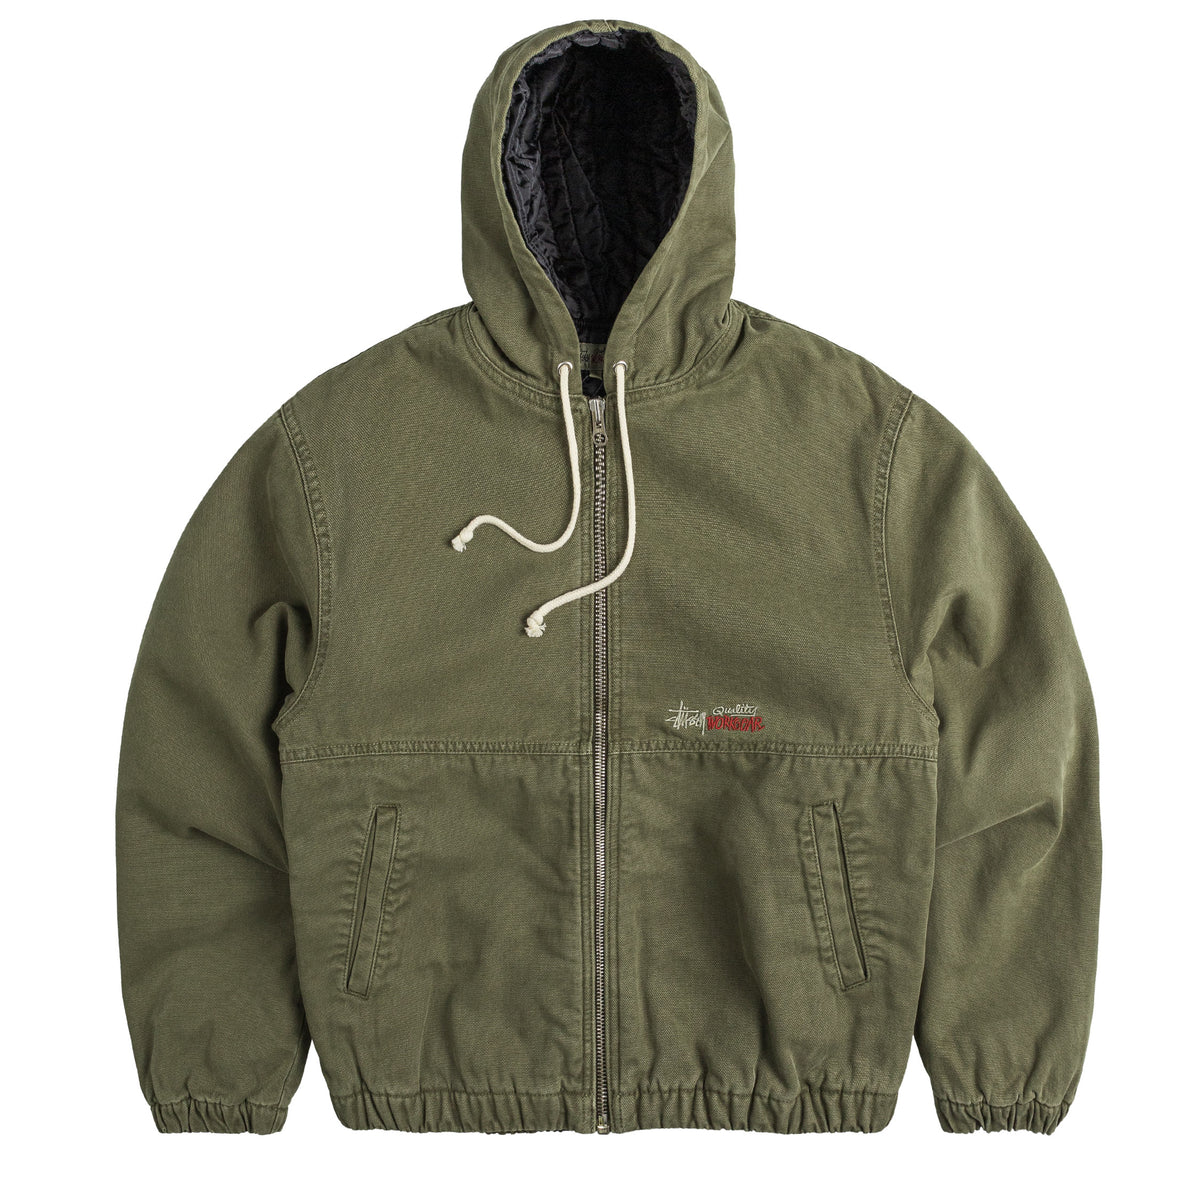 Stussy Canvas Insulated Work Jacket » Buy online now!